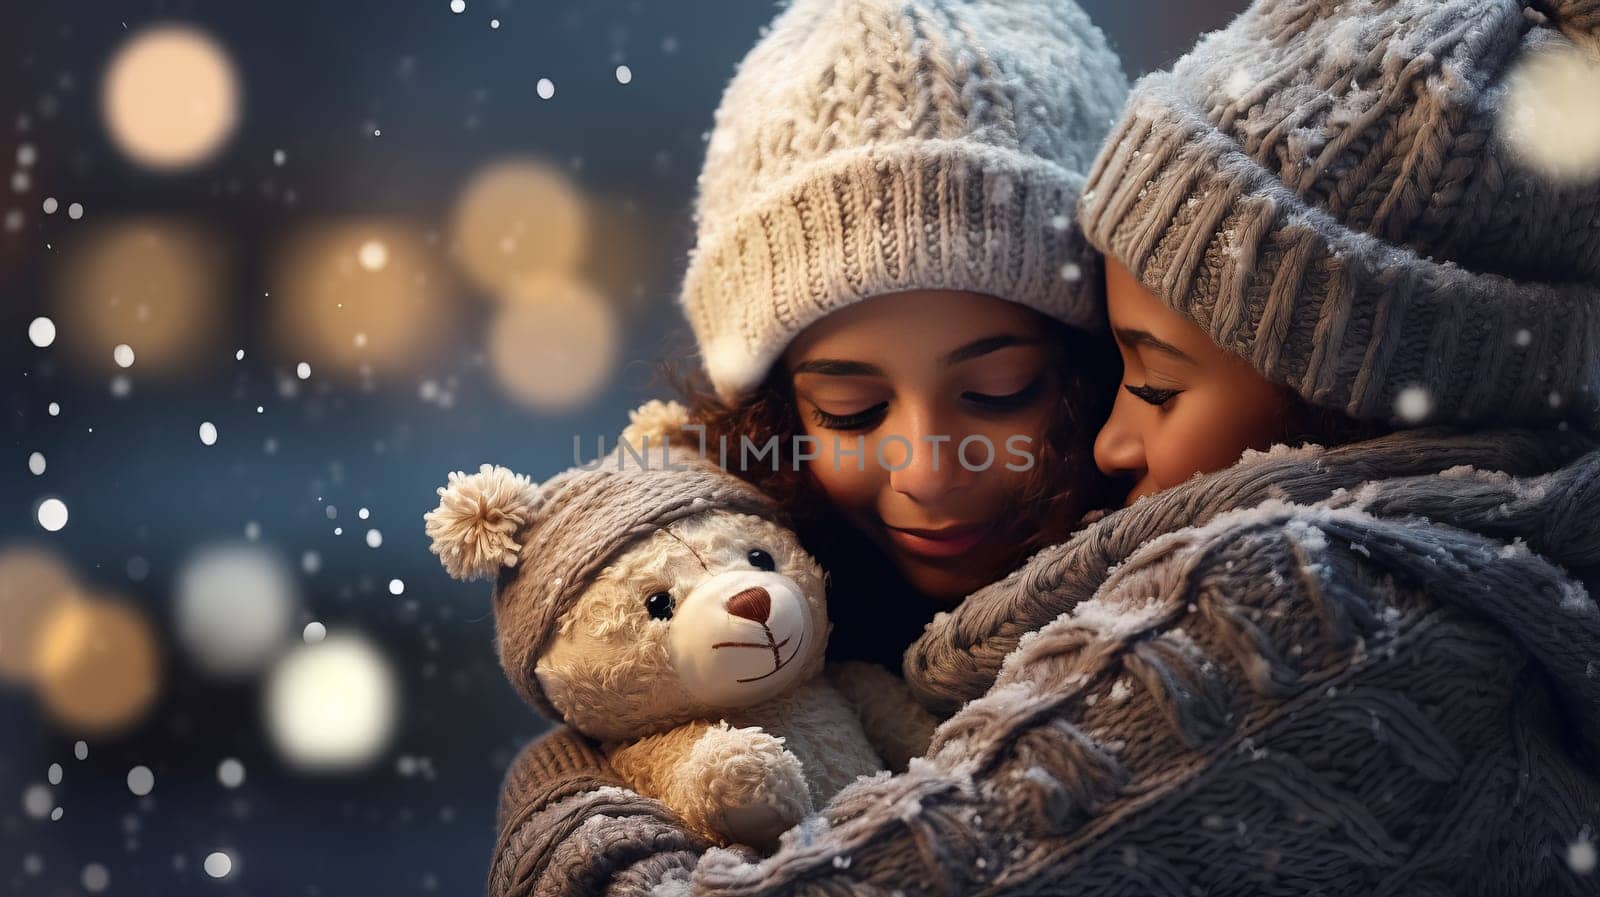 A person hug each other wearing a beige knit hat and scarf feels cozy and festive with blurred Christmas lights and snow in the background. by DogDrawHand